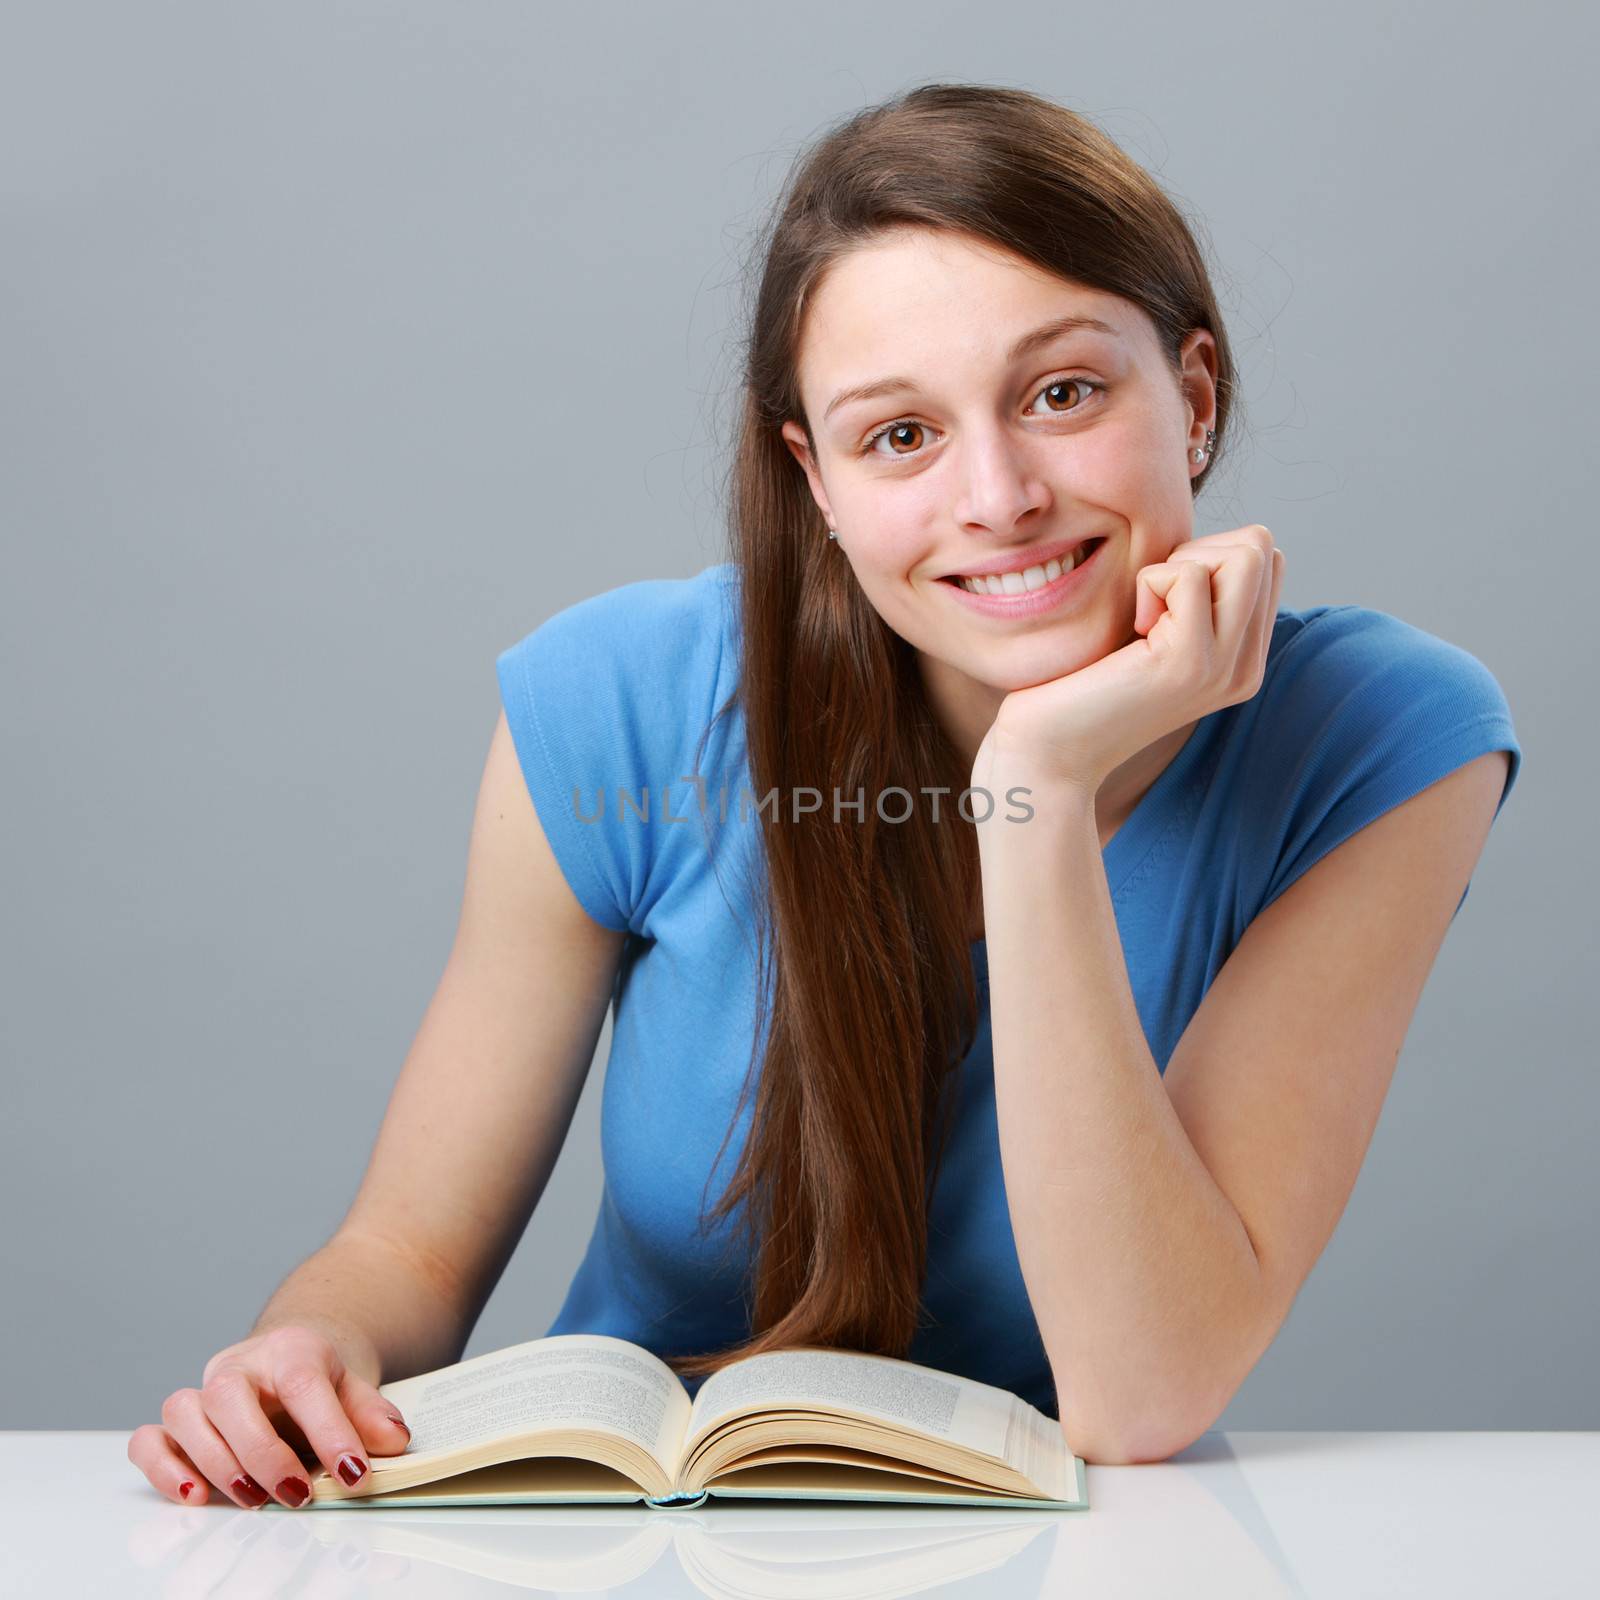 Female young student with book